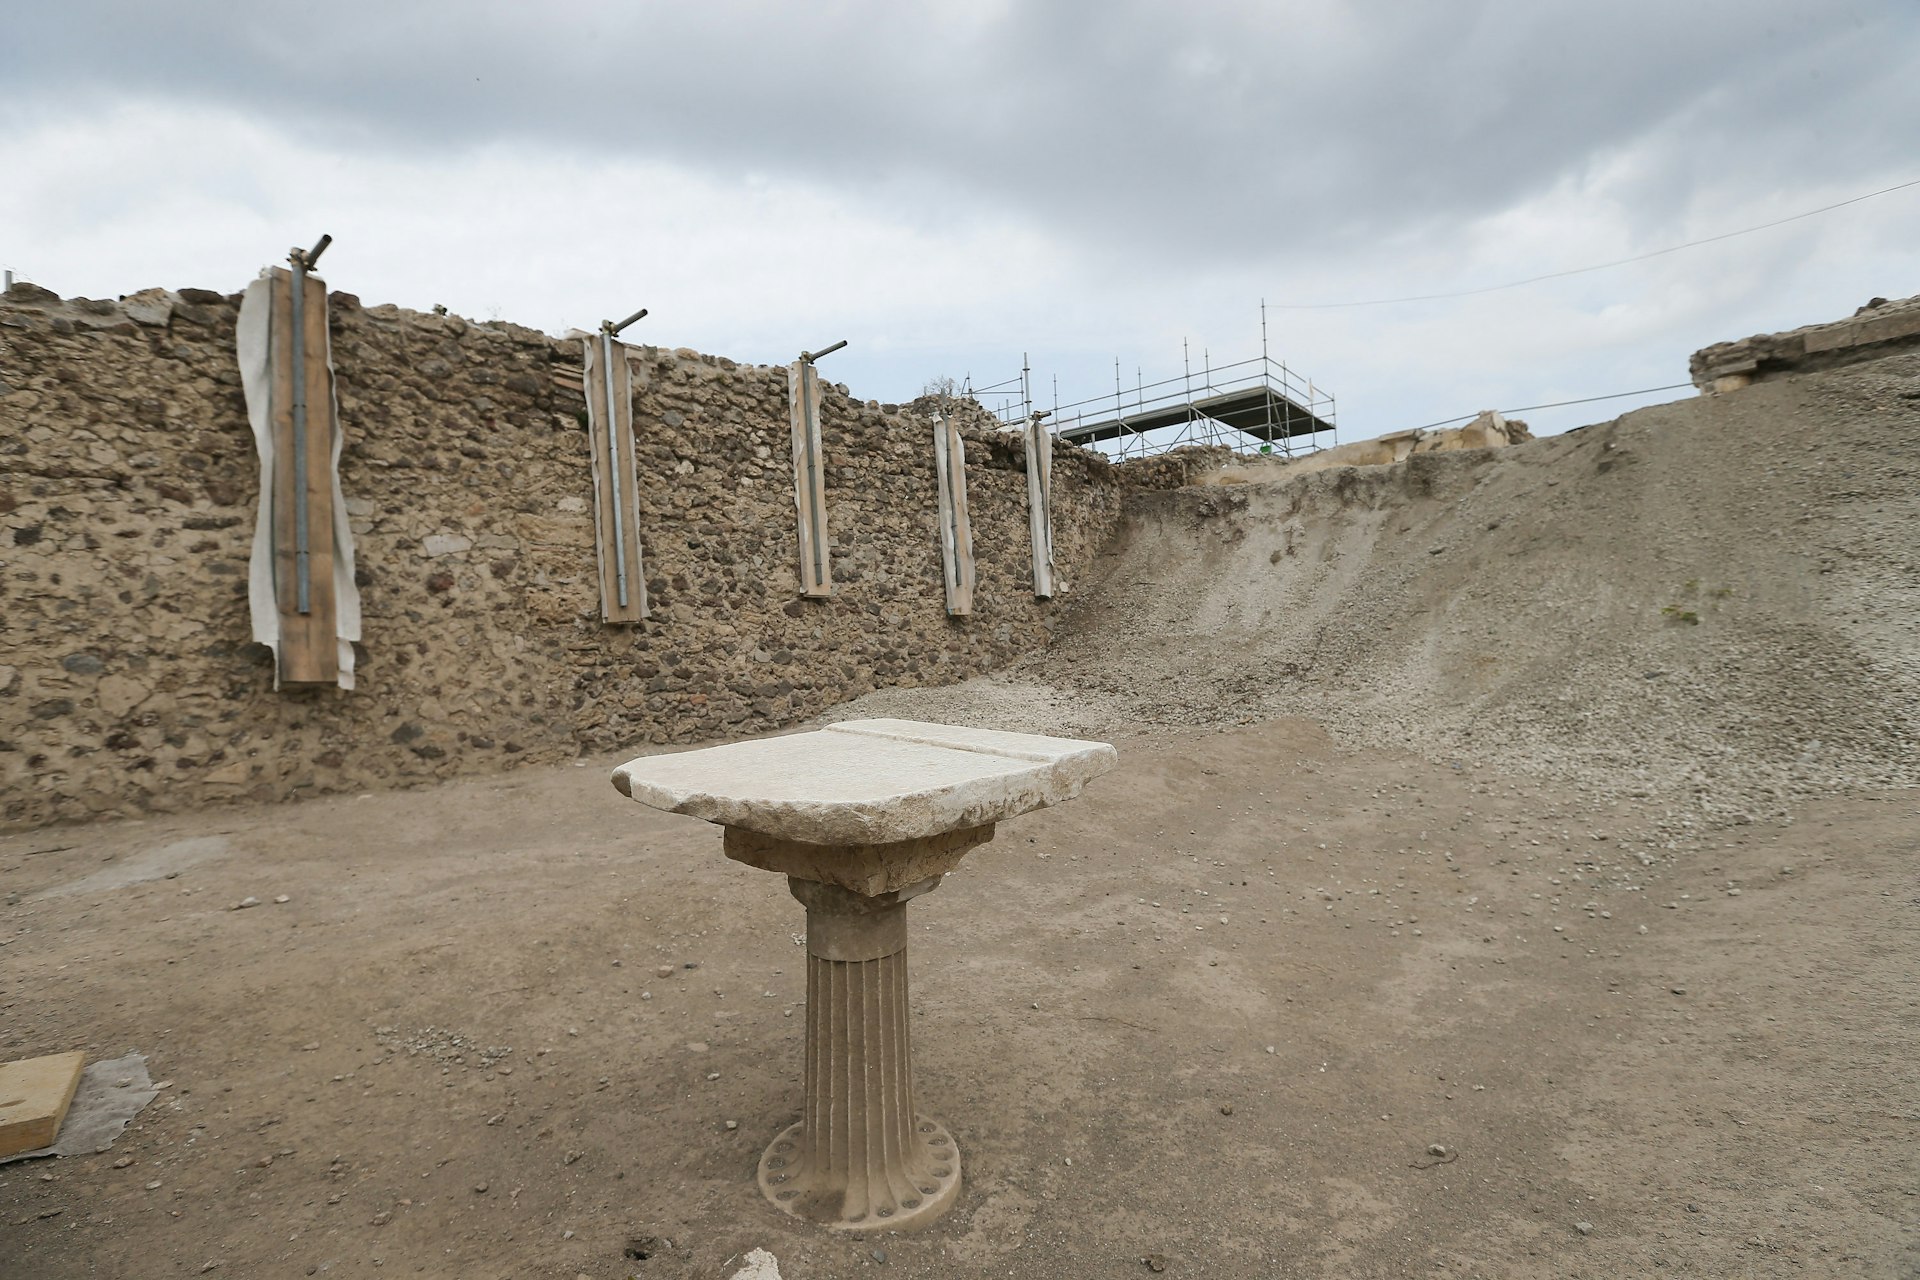 A small table discovered in one of the new excavations that are part of the Regio V site of the Pompeii archaeological excavations